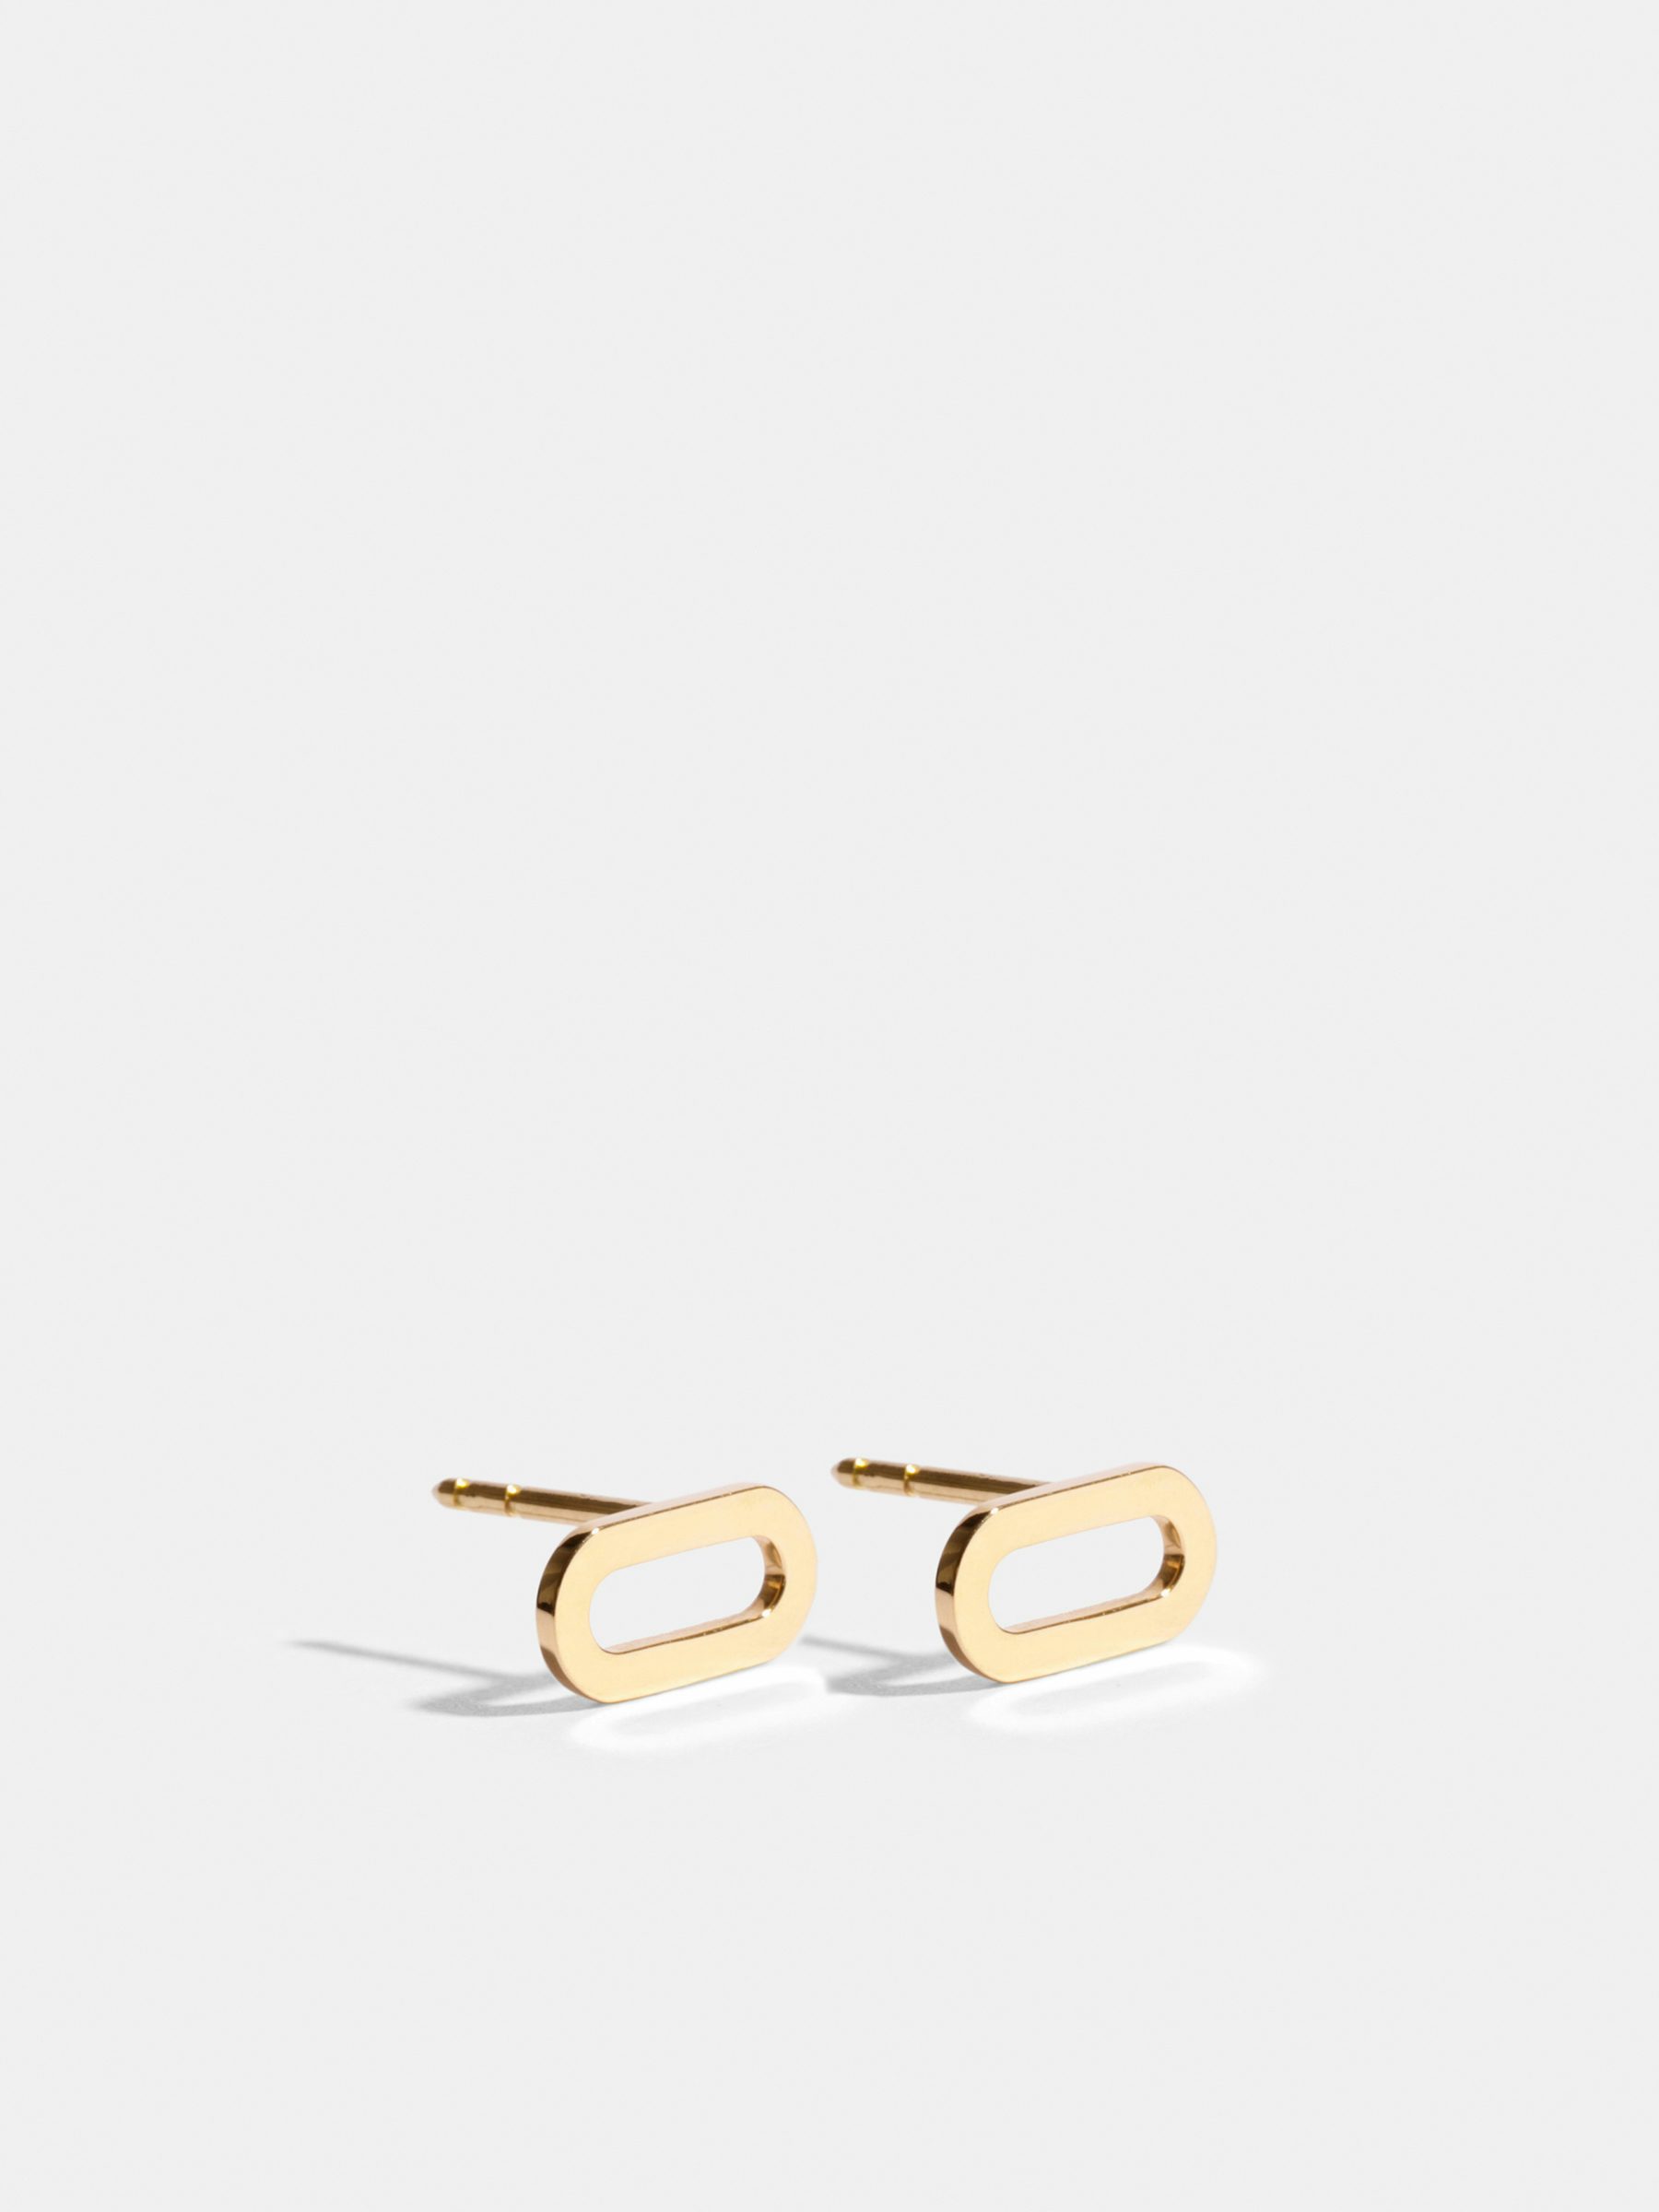 Ear clip in 18k ethical yellow gold certified Fairmined, the pair | JEM jewellery ethically minded